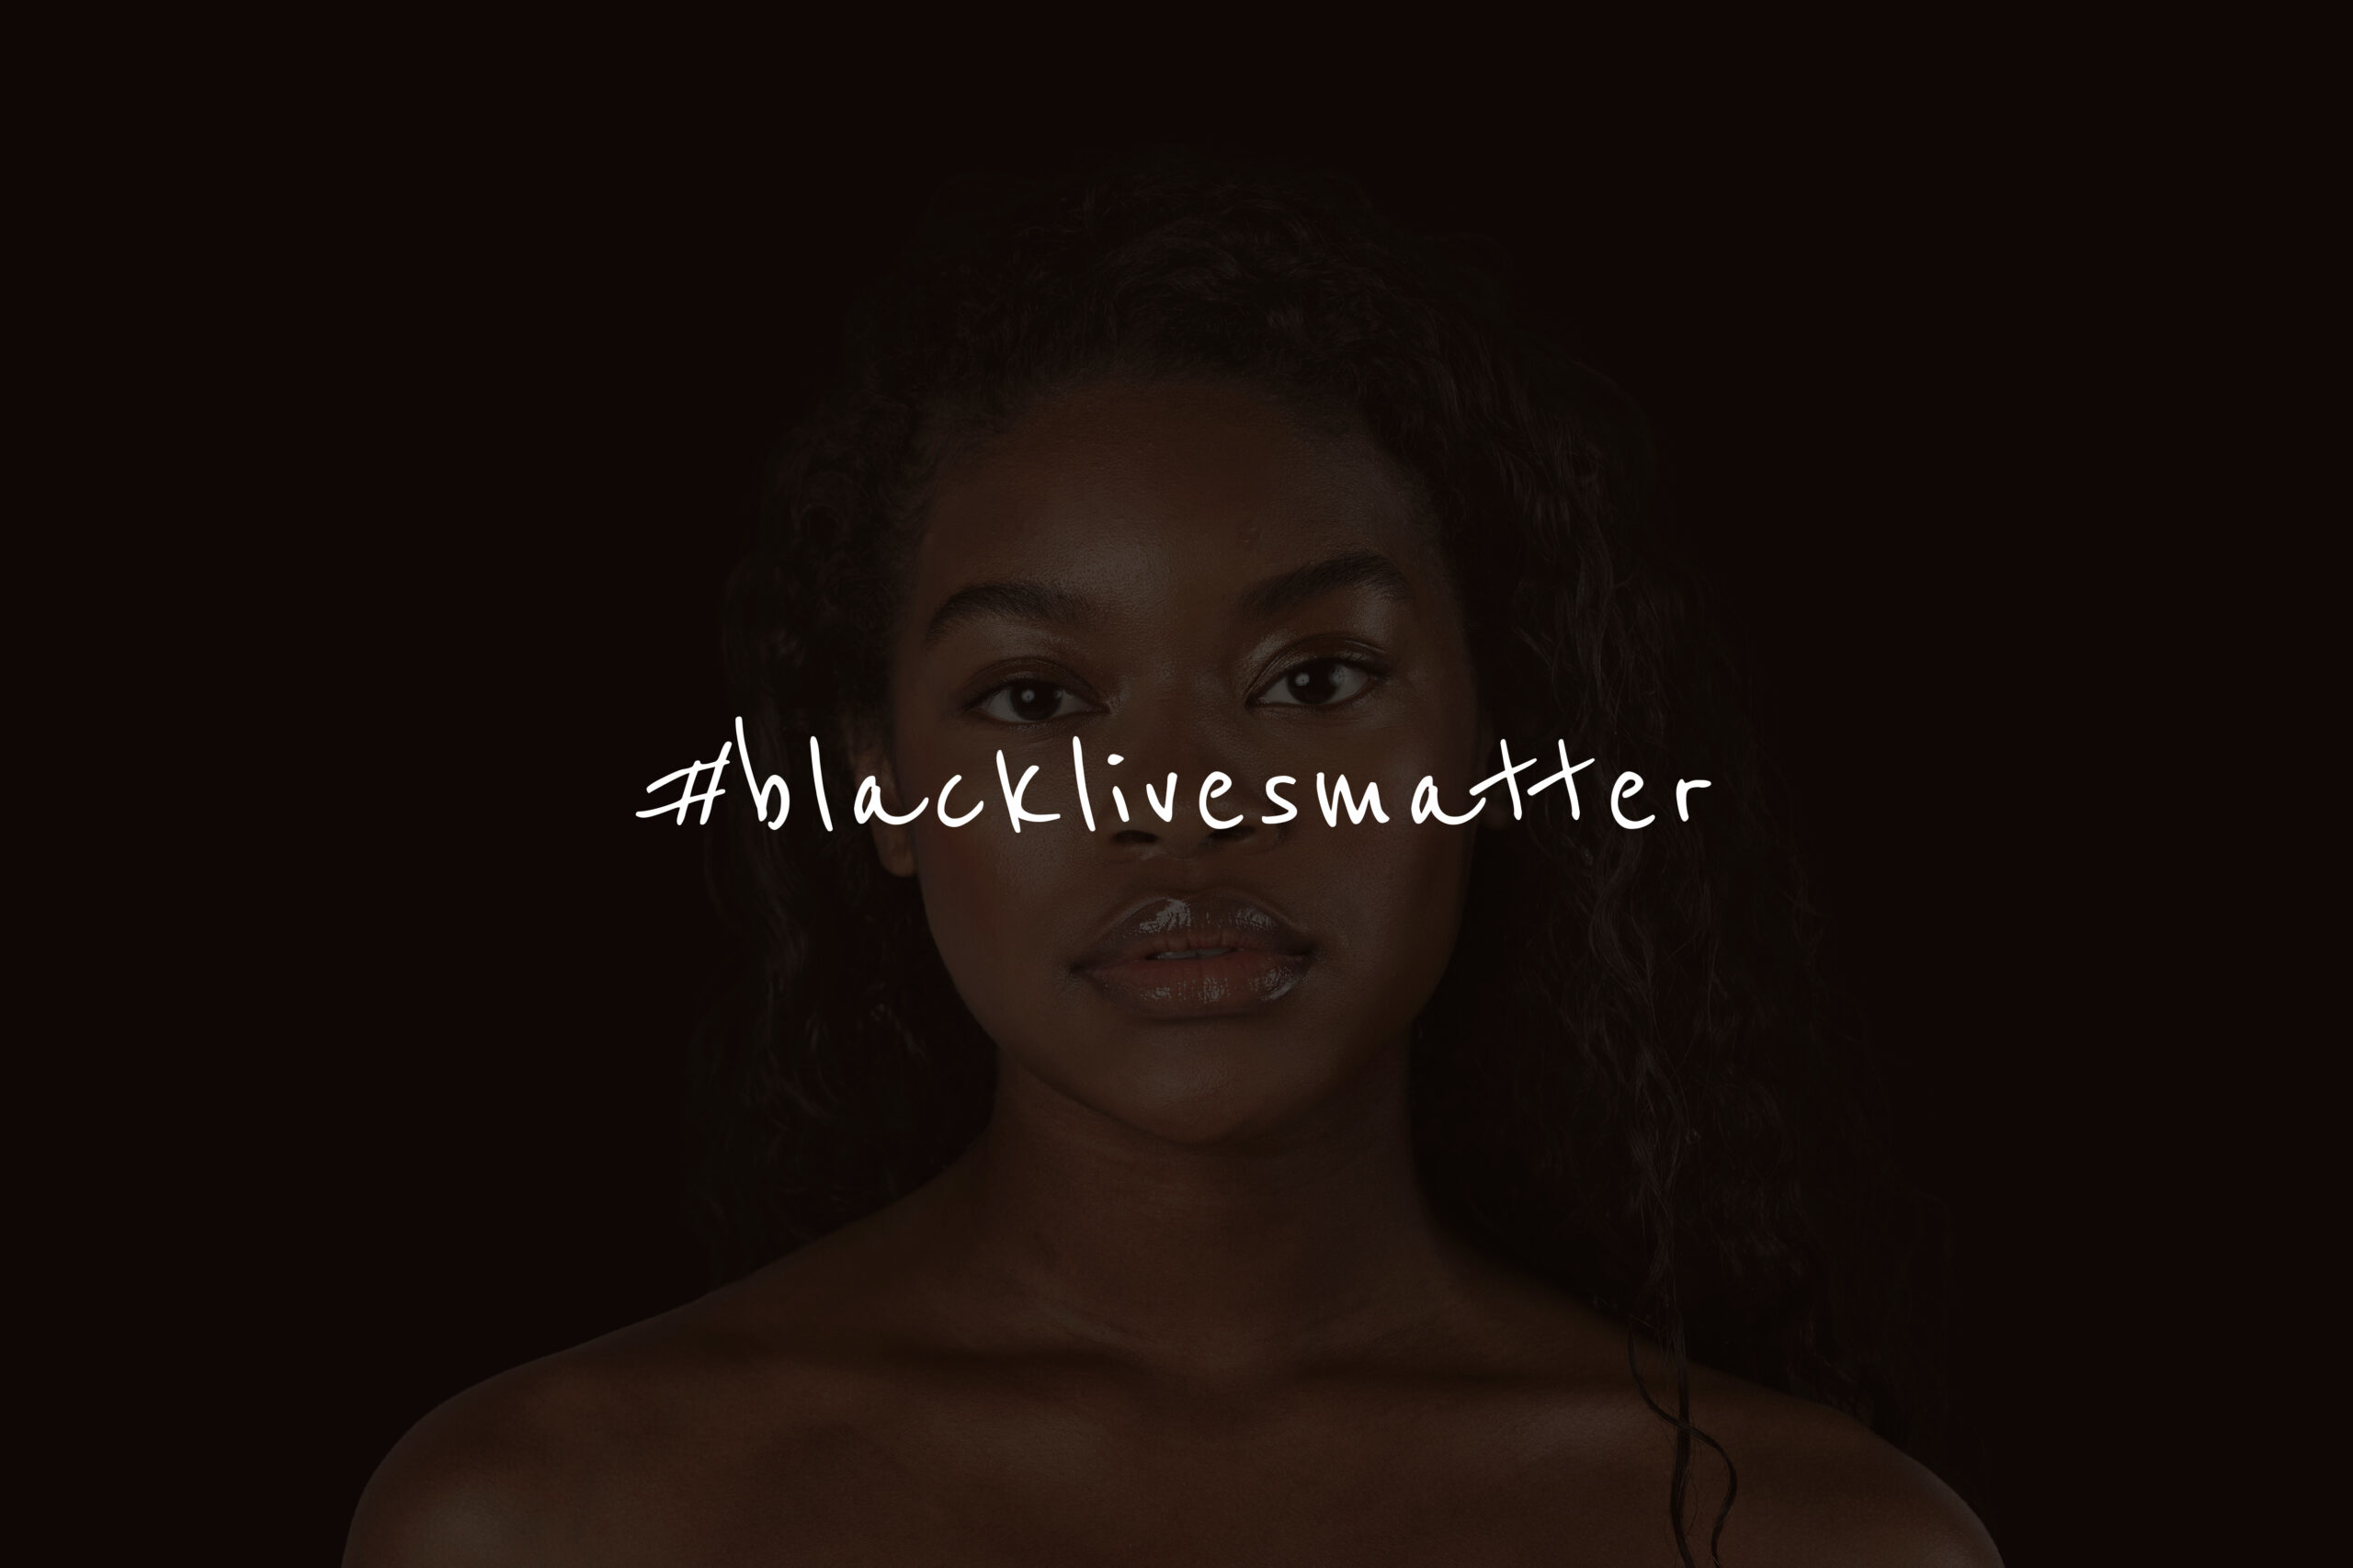 blm-campaign-with-african-american-woman-in-the-shadow-social-media-post-scaled-1.jpg